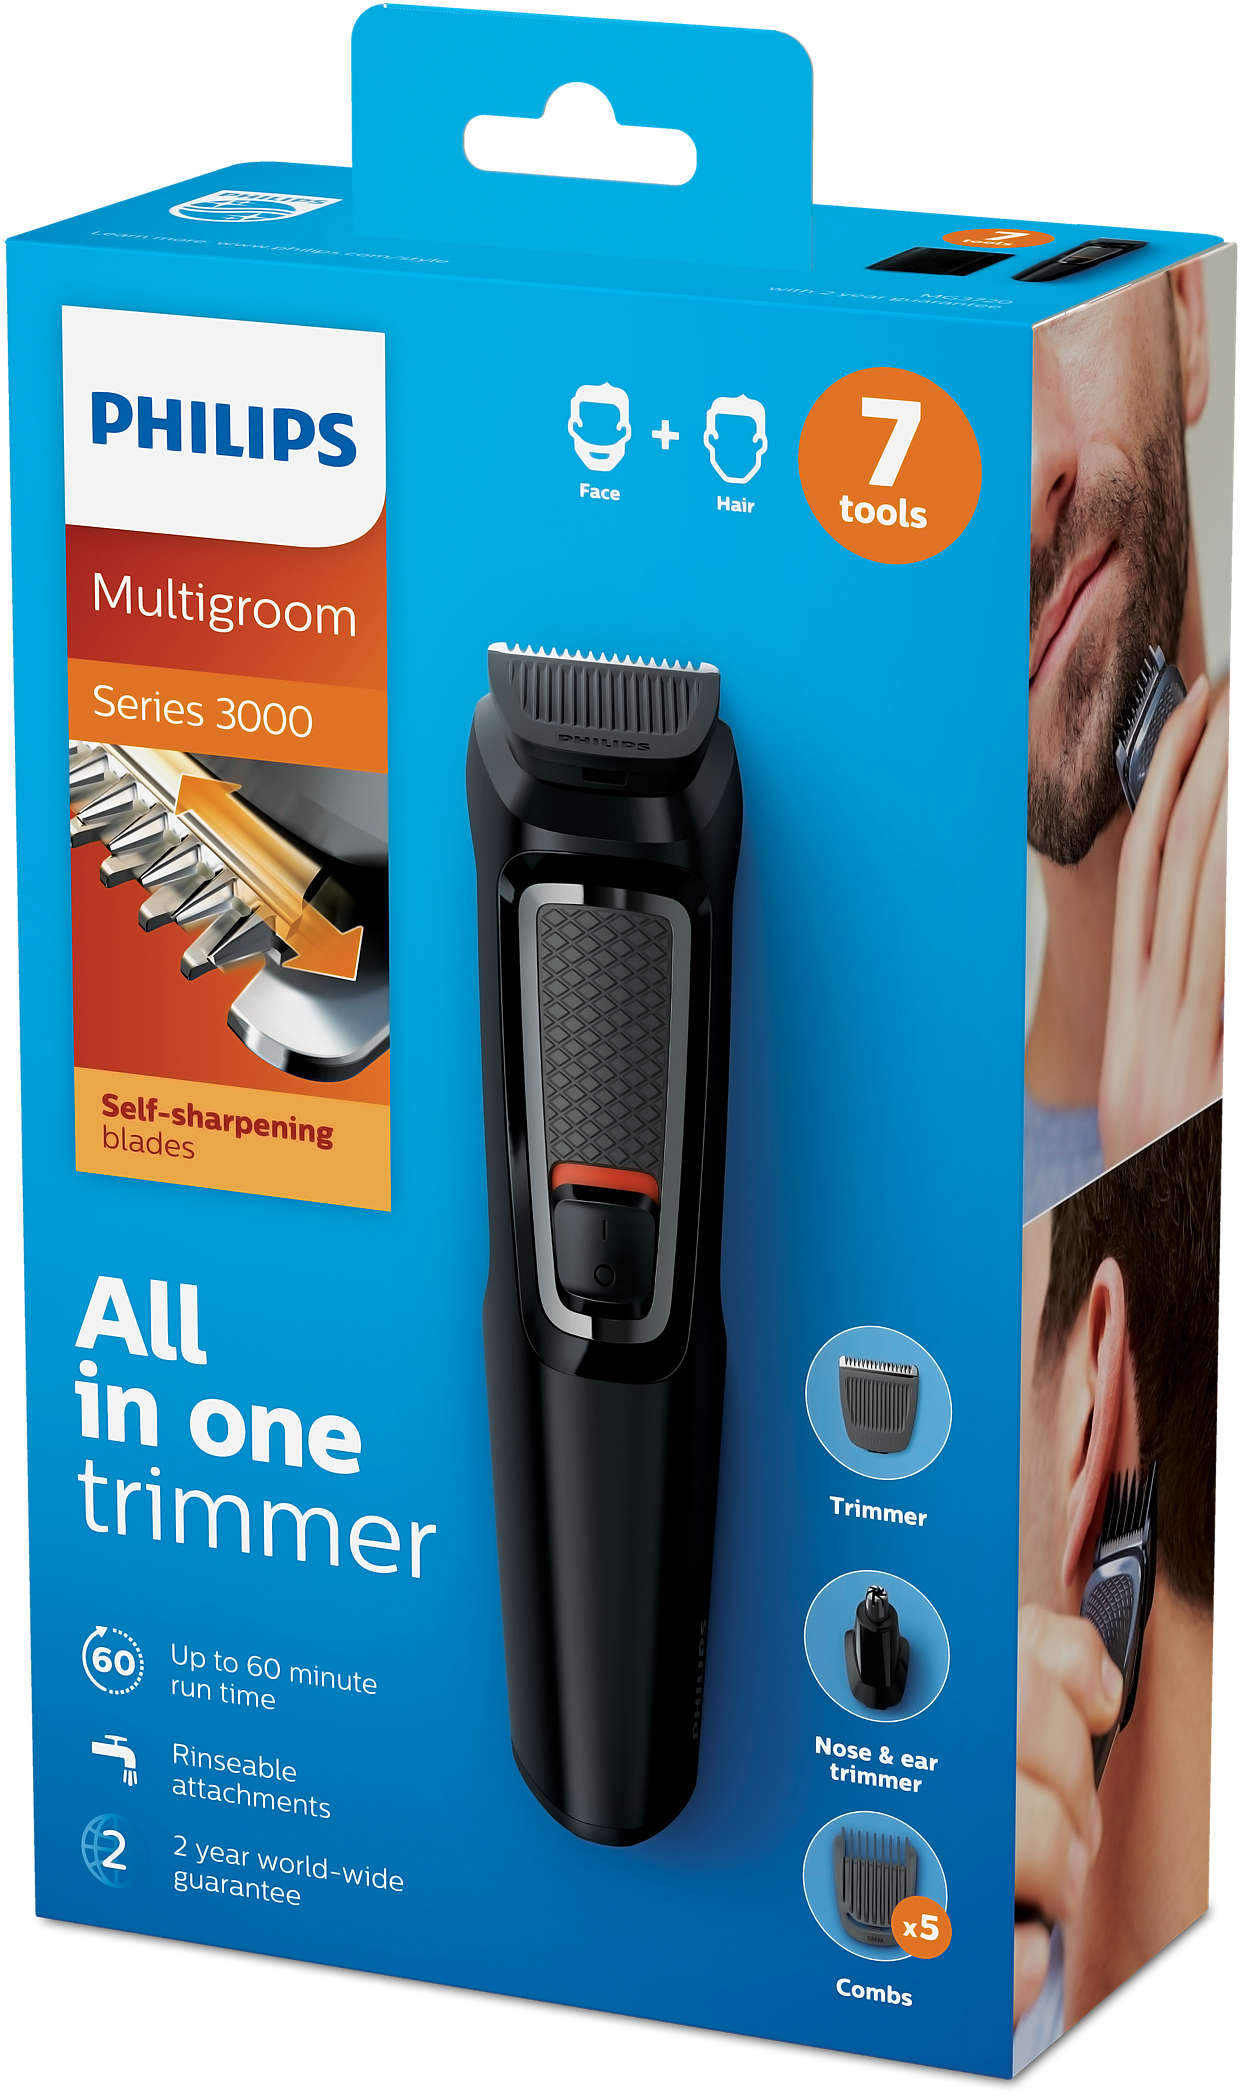 Multigroom Philips Face MG3720/13 3000 | and Hair 7-in-1, series